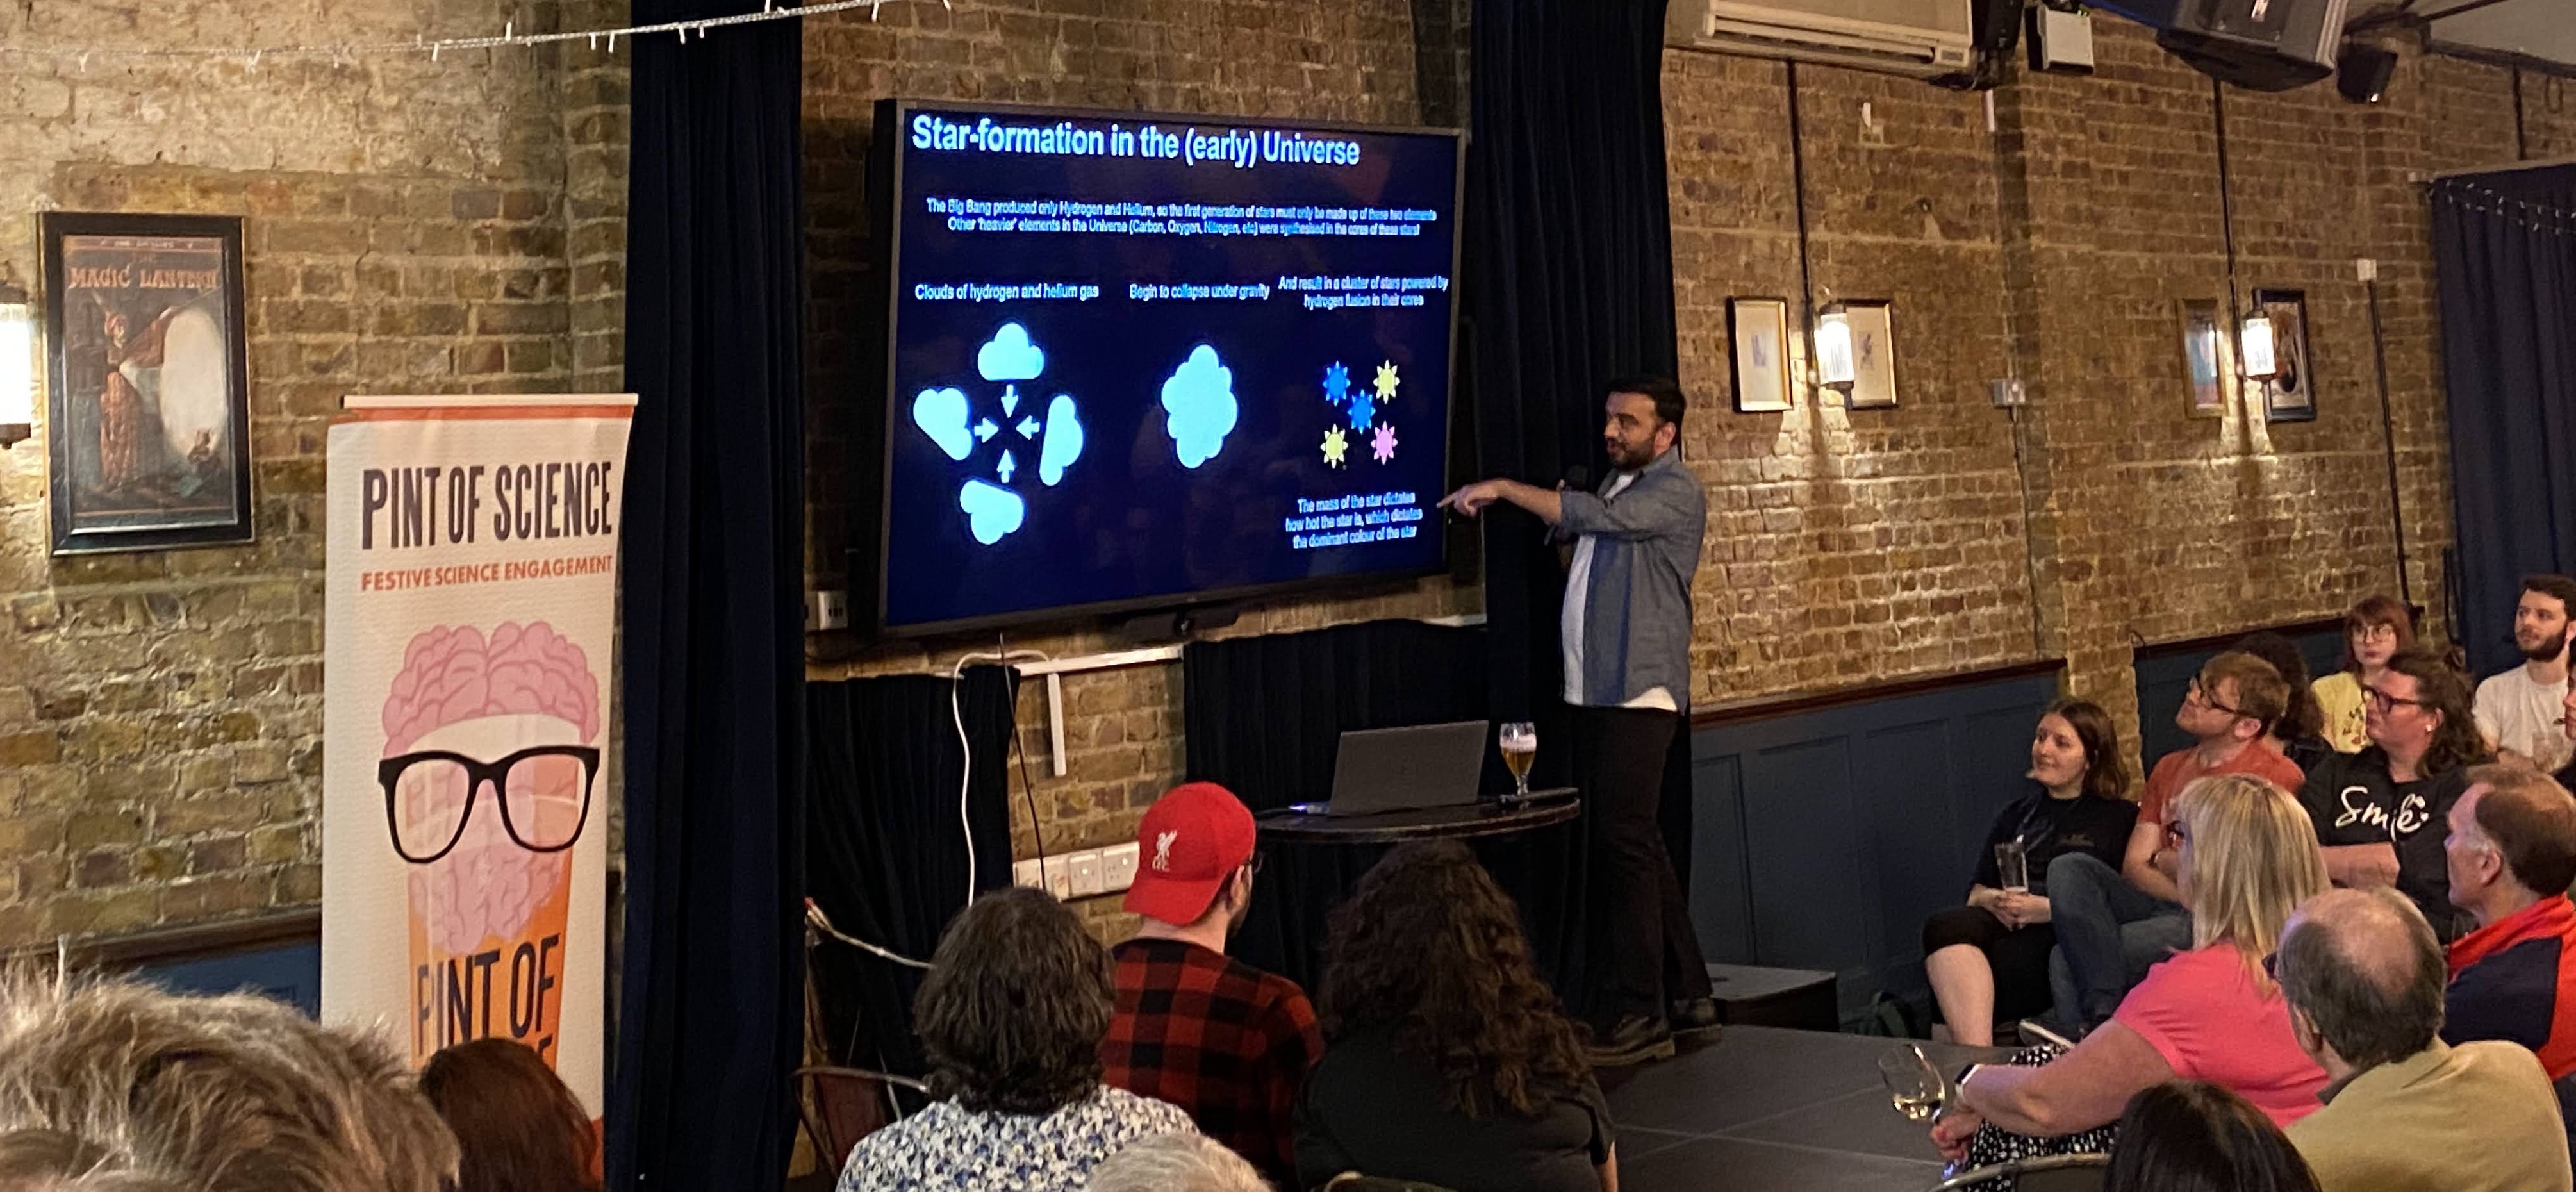 Aayush Saxena giving a talk at the Pint of Science festival in London